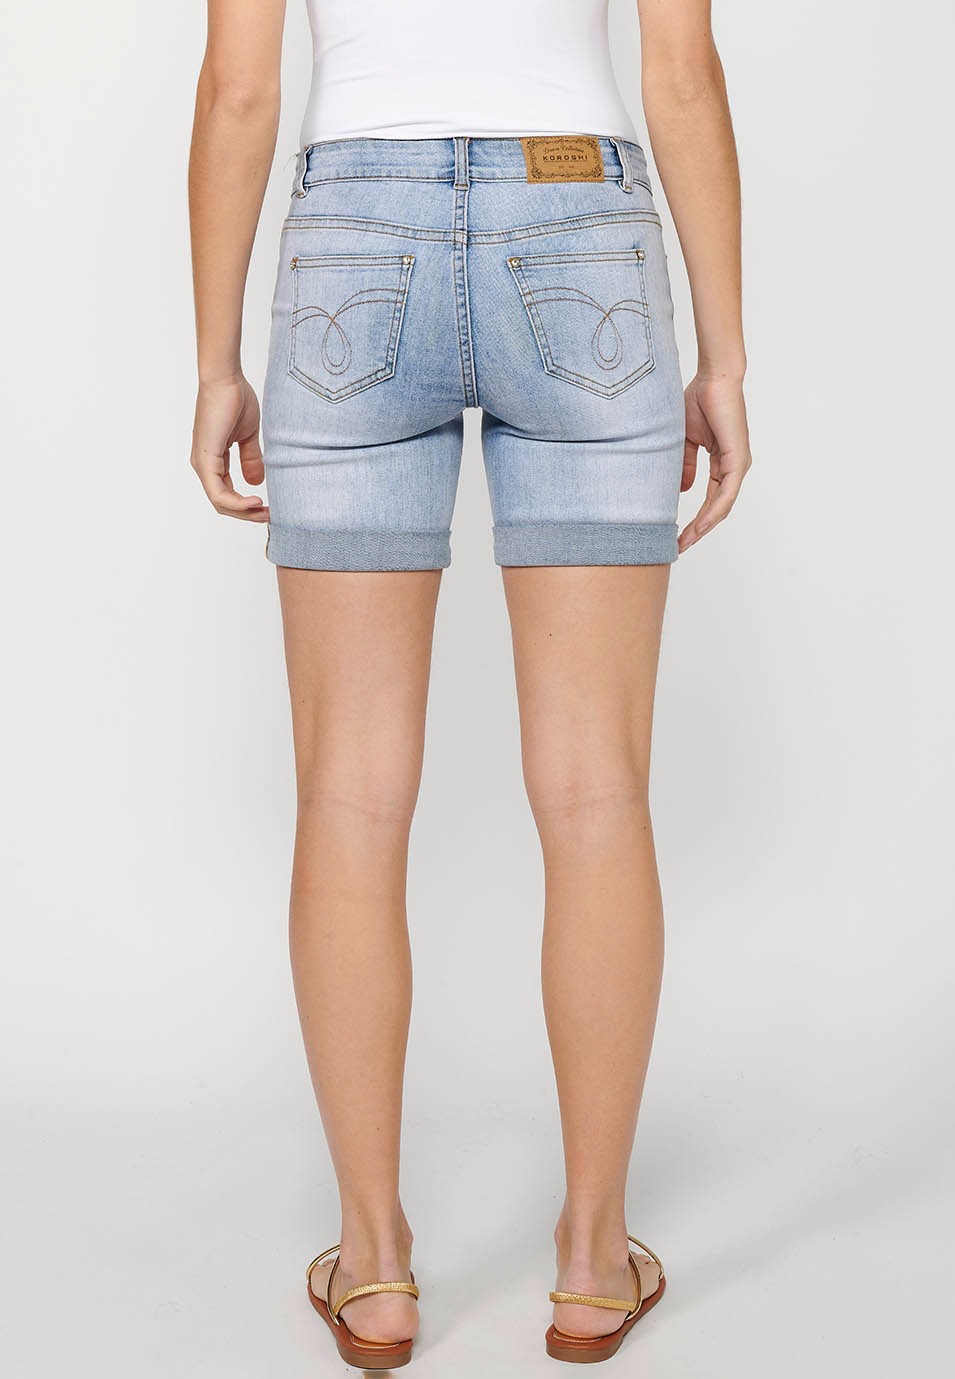 Denim shorts with front zipper and button closure and front floral embroidered details with five pockets, one blue pocket pocket for women 4